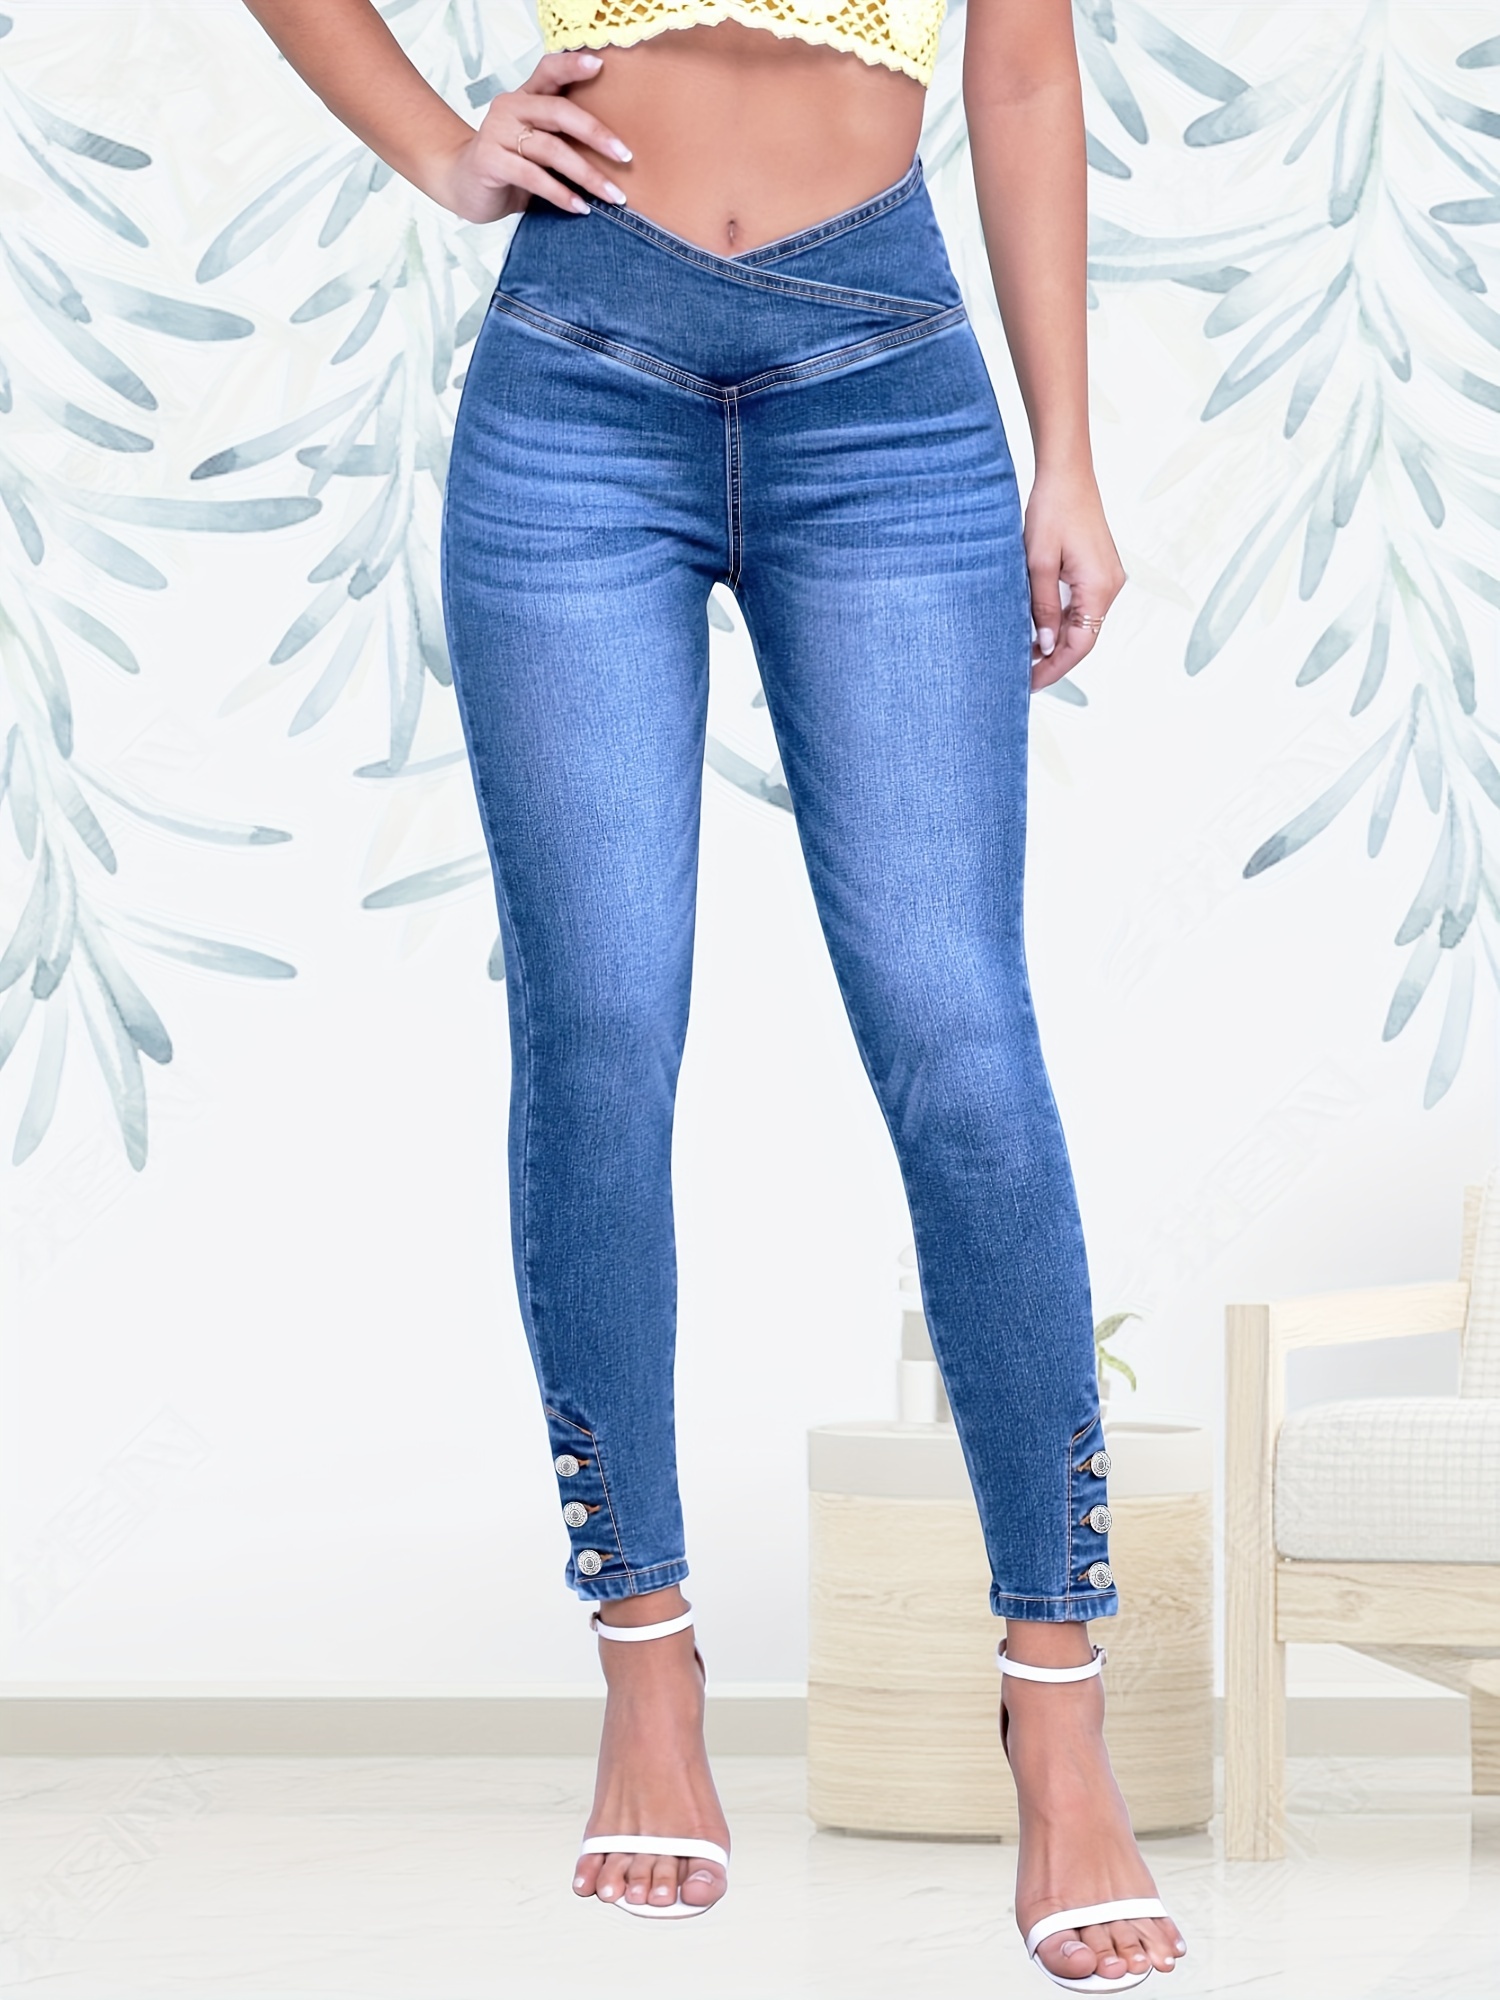 High Waist Washed Skinny Jeans, Slim Fit High Stretch, 46% OFF